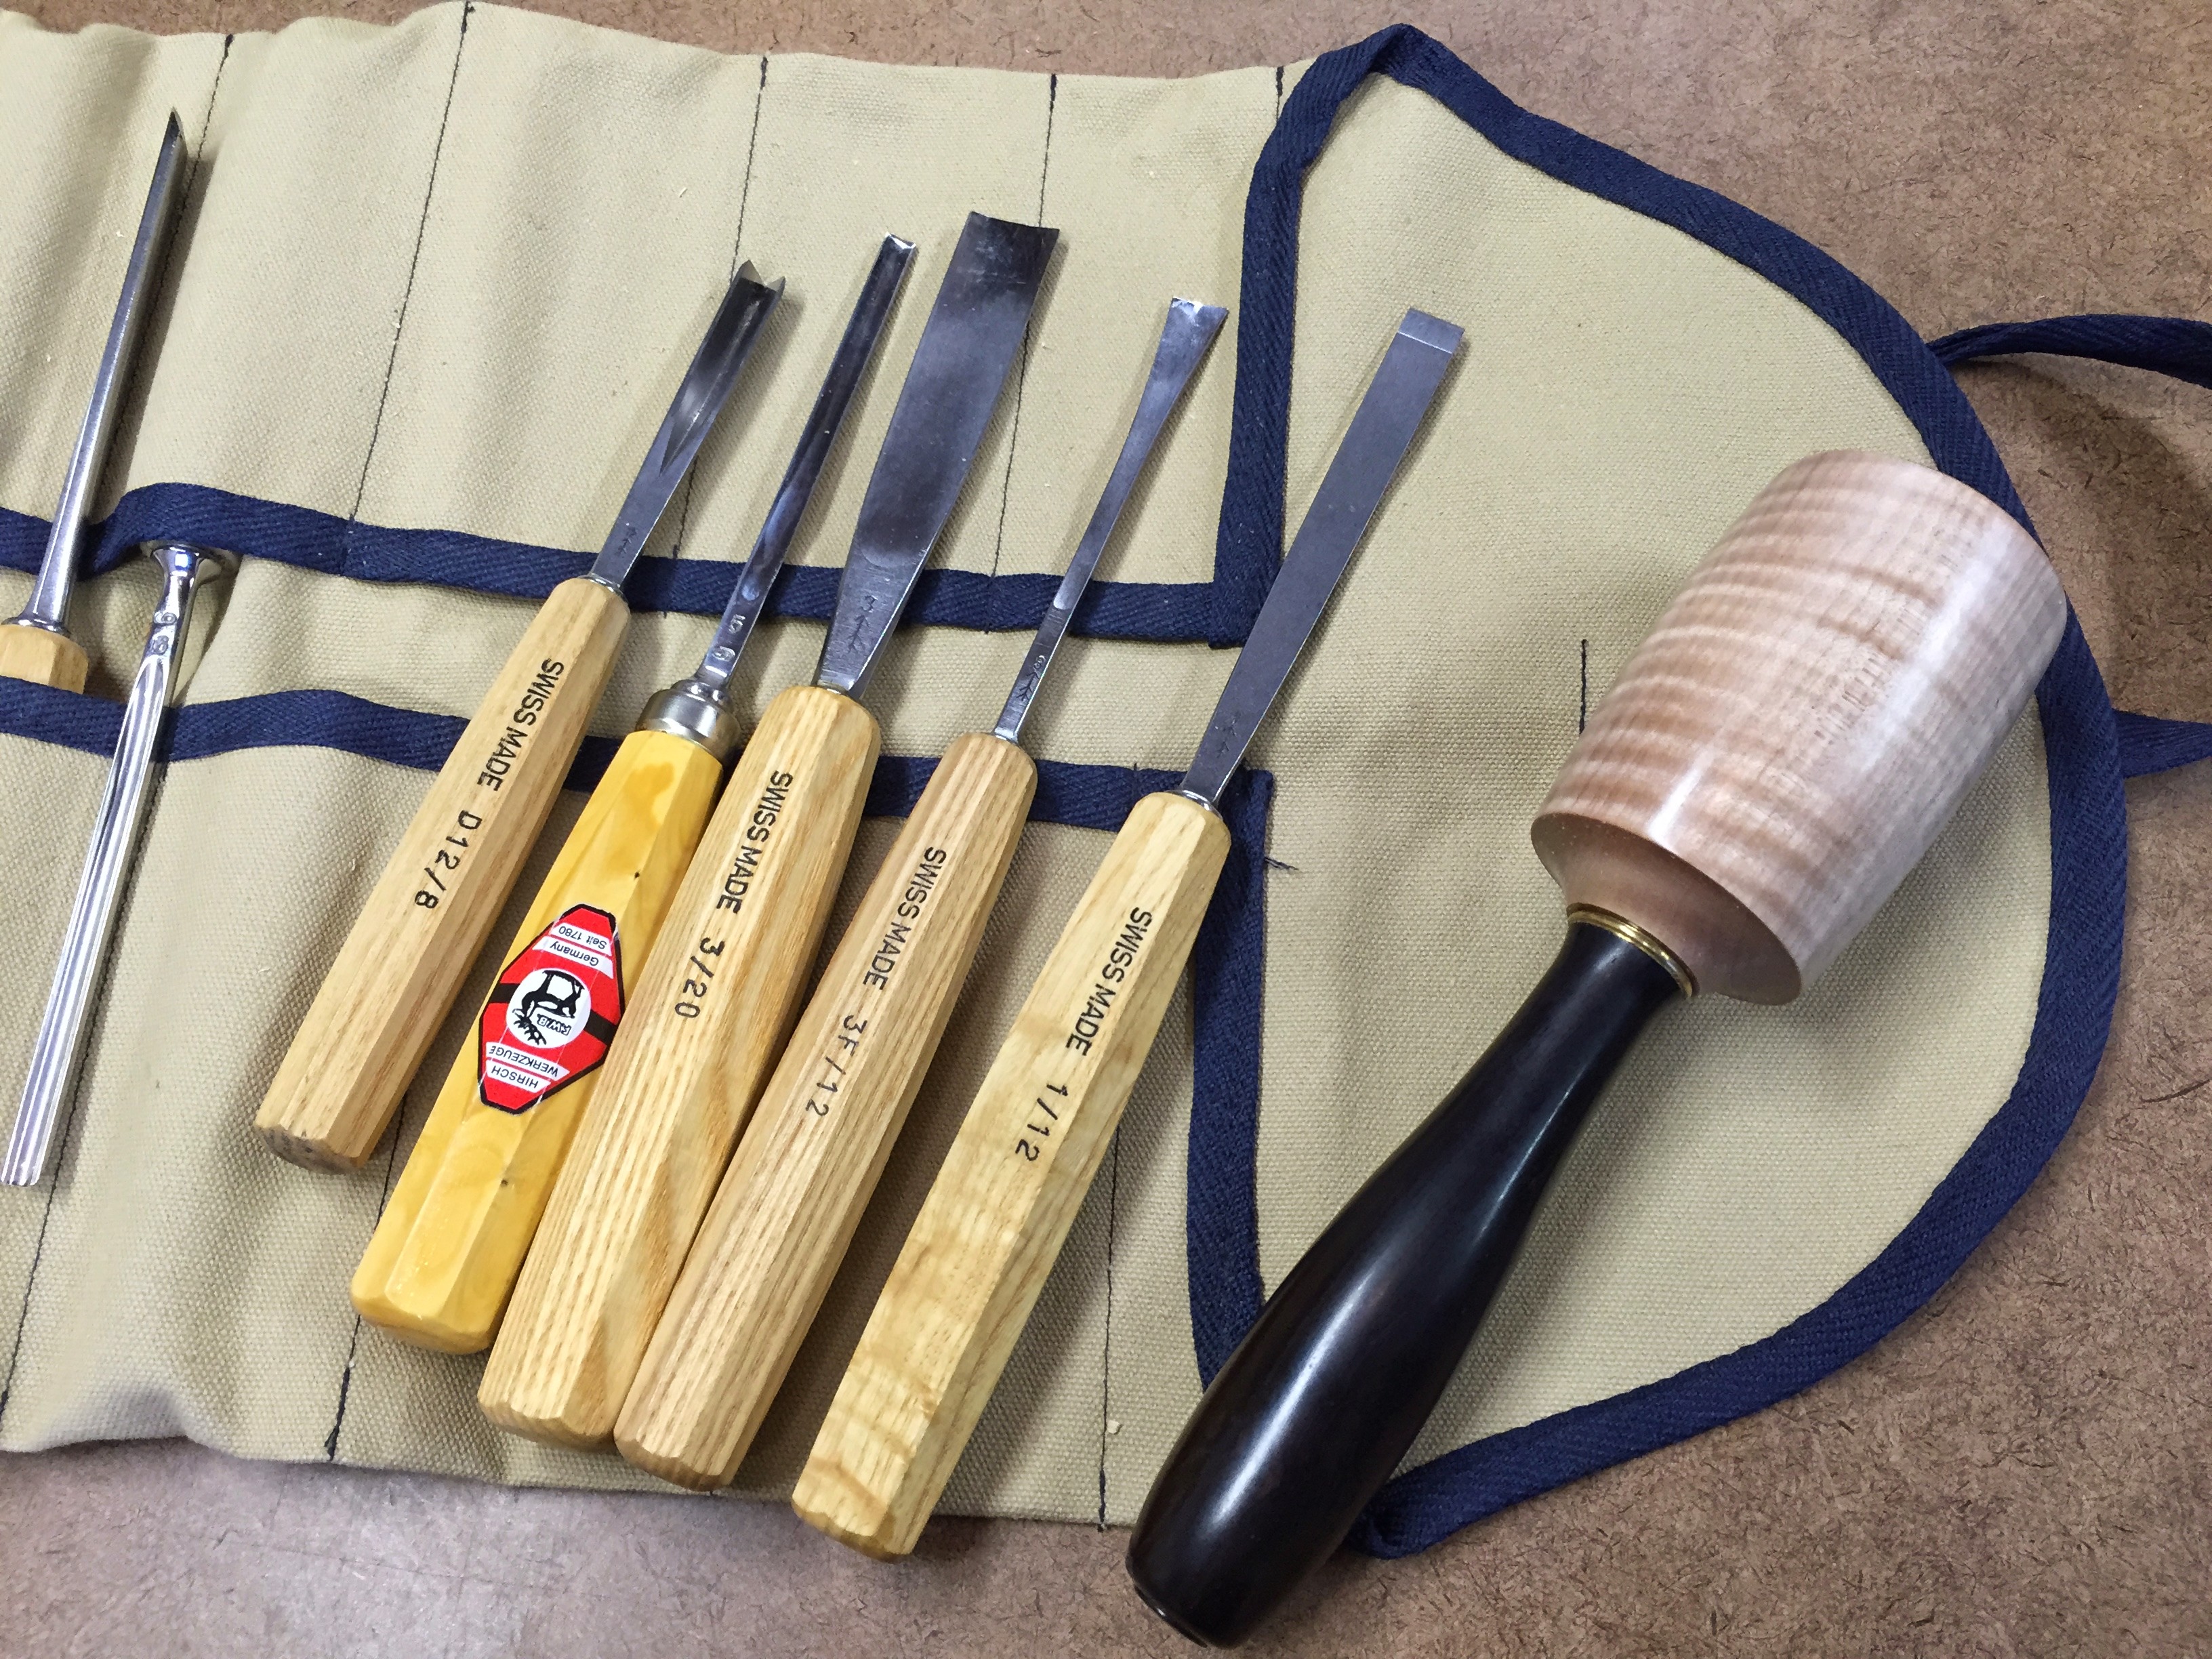 Primarily used these 5 tools and the mallet